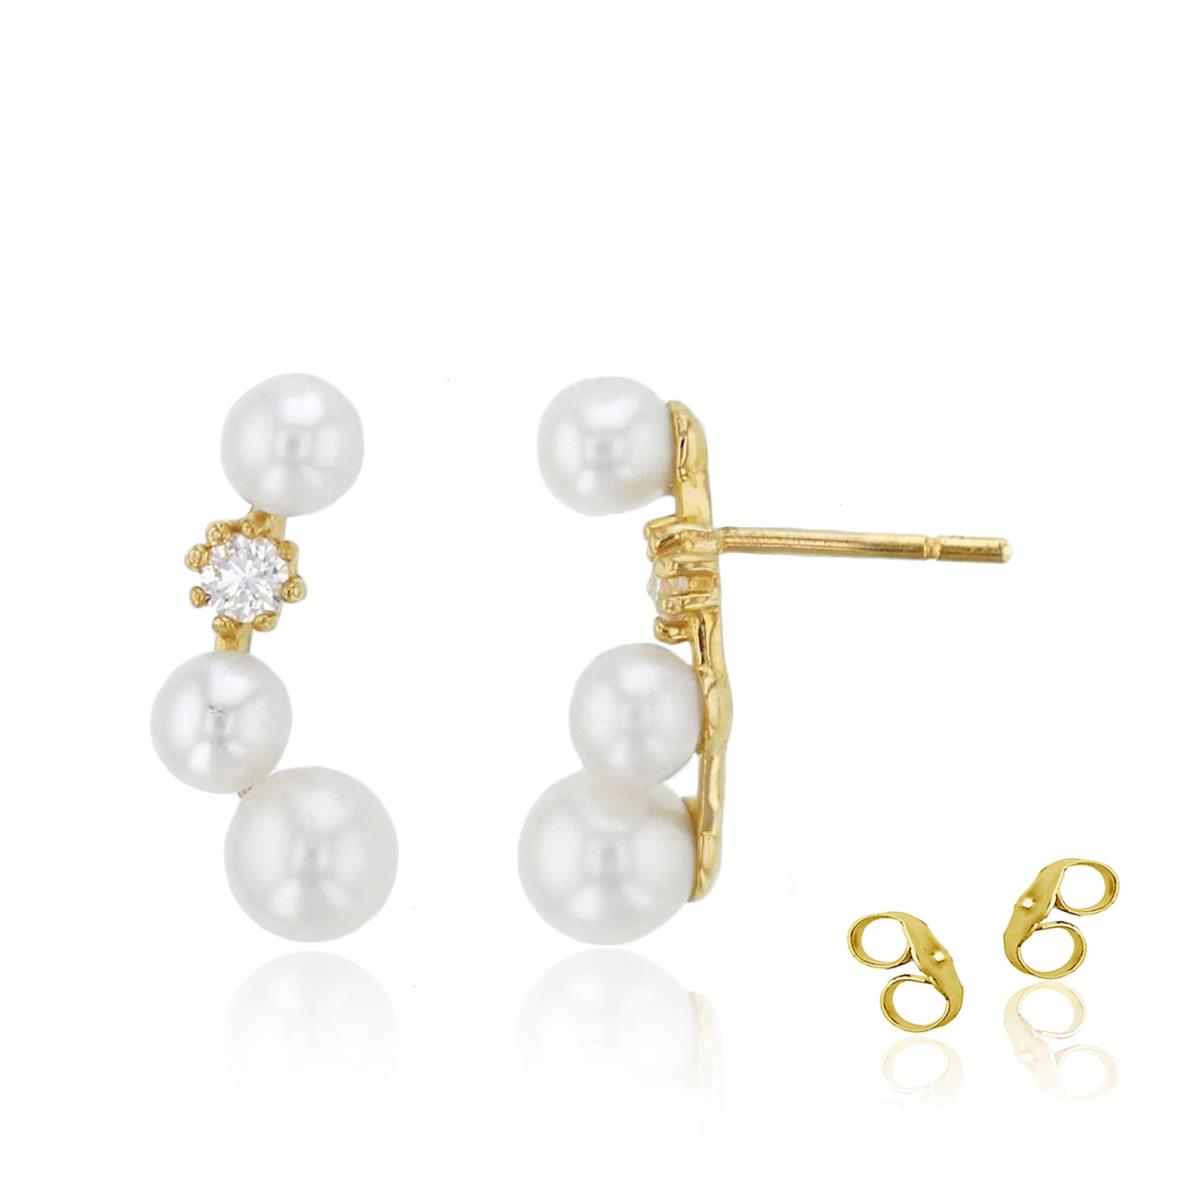 14K Yellow Gold Rnd Cr. White Sapphire & 3mm/4mm FWP Crawl Earrings with 4.5mm Clutch